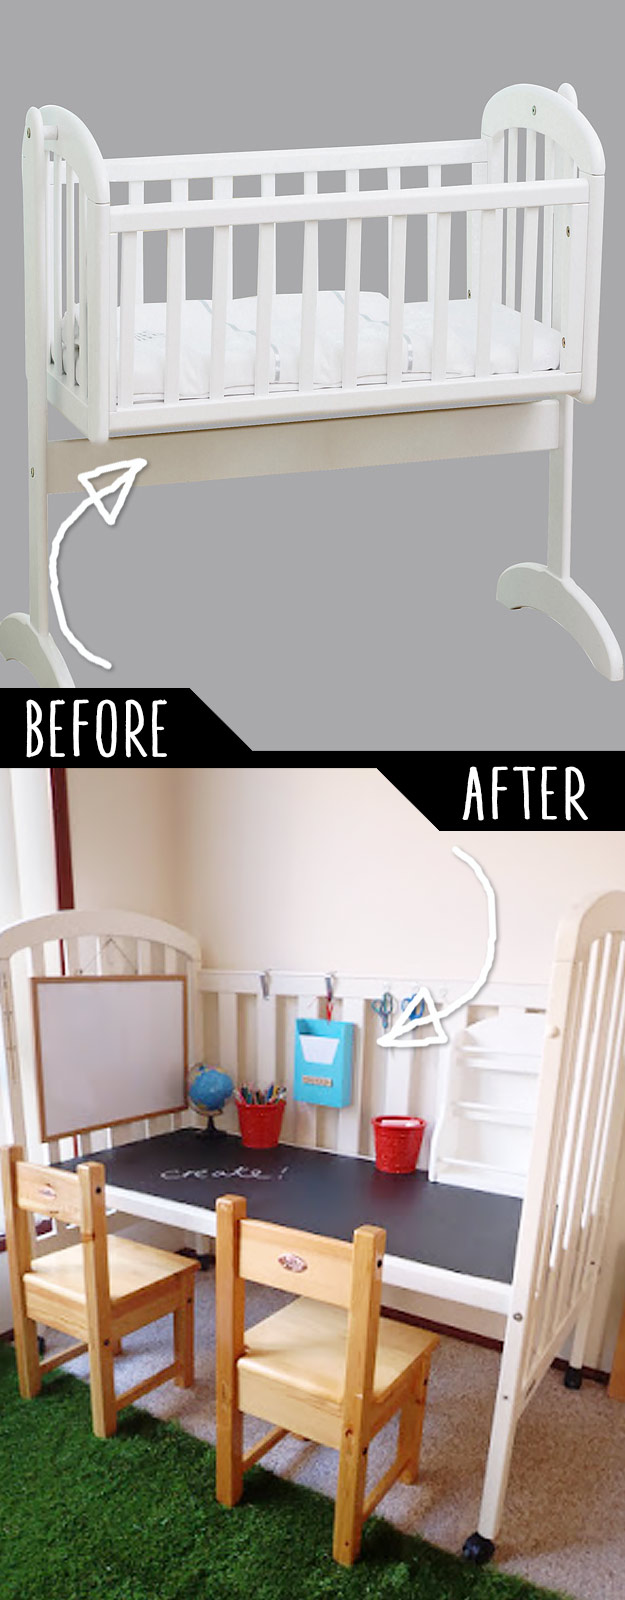 19 DIY Idea To Play With Old Furniture 8